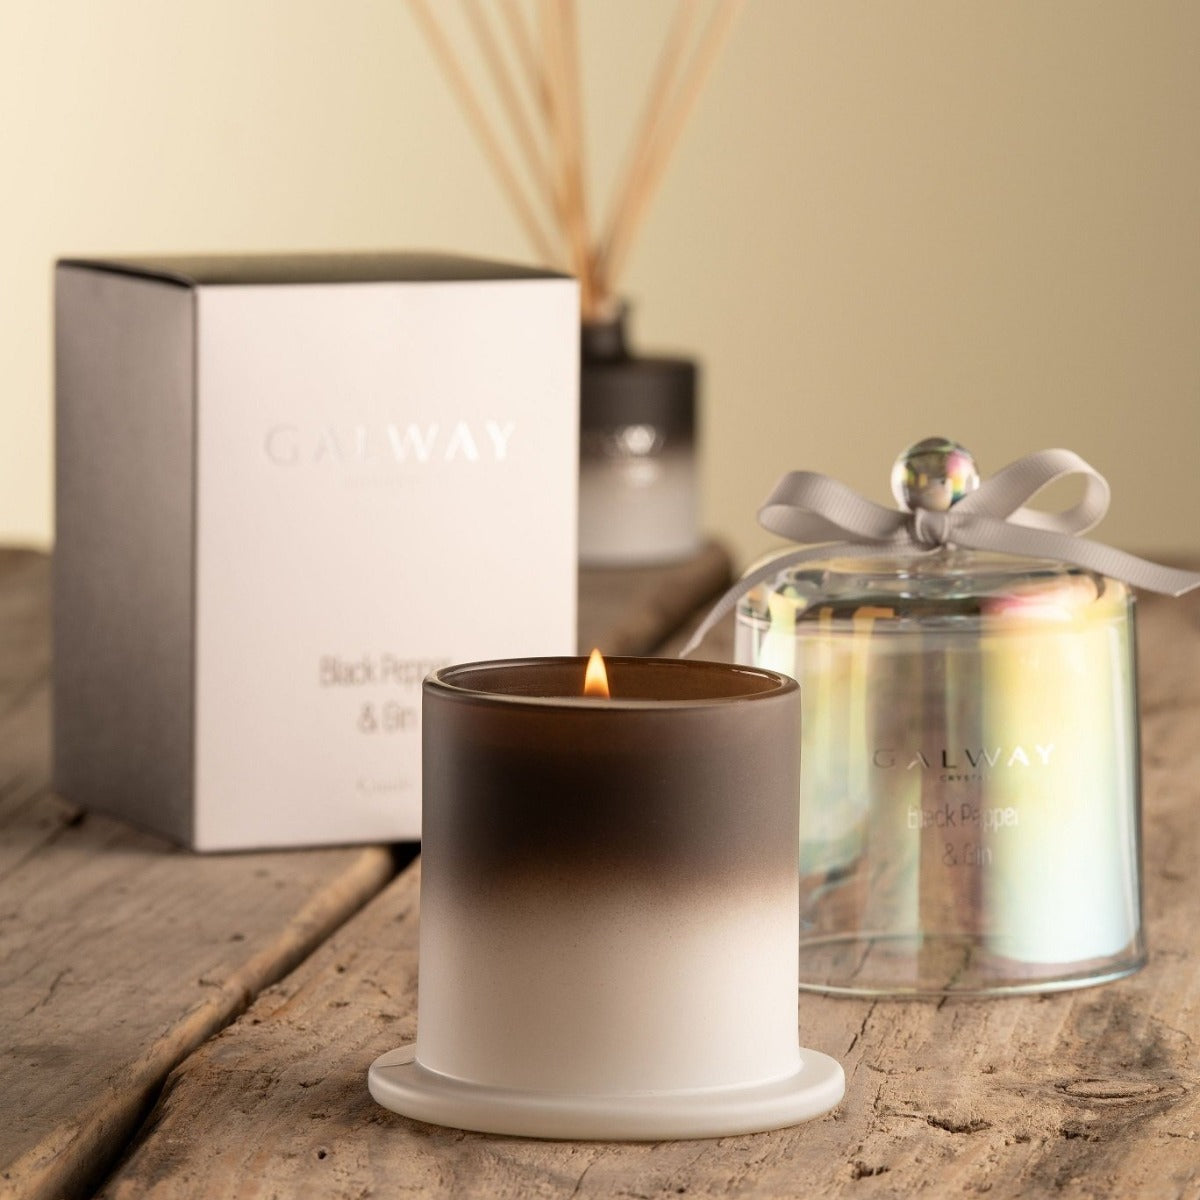 Galway Crystal Gin & Black Pepper Bell Jar Candle  Transport yourself to a special place with the perfect fragrance for your home. Our Black Pepper & Gin scent will transform any room and certainly set the right mood. Traditional aromatic botanicals & spicy black pepper are blended with notes of juniper berry & bracing pine. Base notes of earthy musk bring this classic combination together to create a sparkling, crisp fragrance. . If you love a spicy and crisp scent our Black Pepper & Gin is for you.